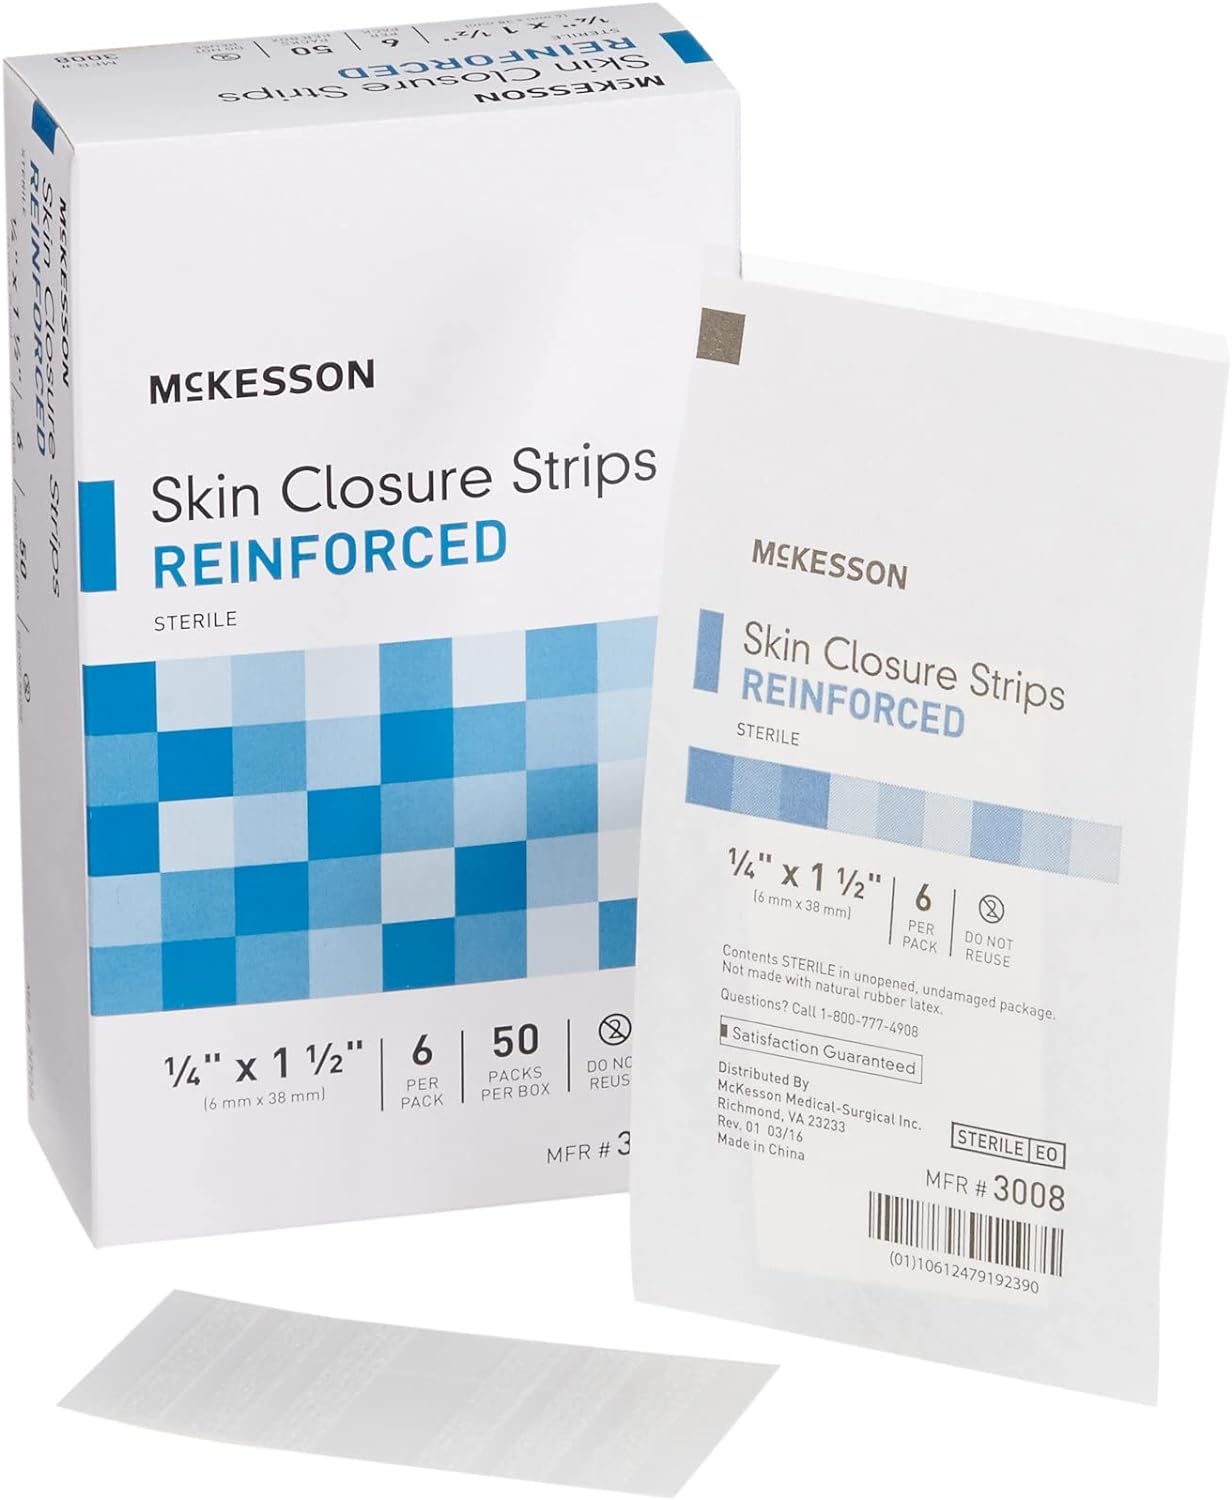 McKesson Skin Closure Adhesive Strips, Reinforced Steri Strip for Wound Care, 1/4 in x 1 1/2 in, 200 Count